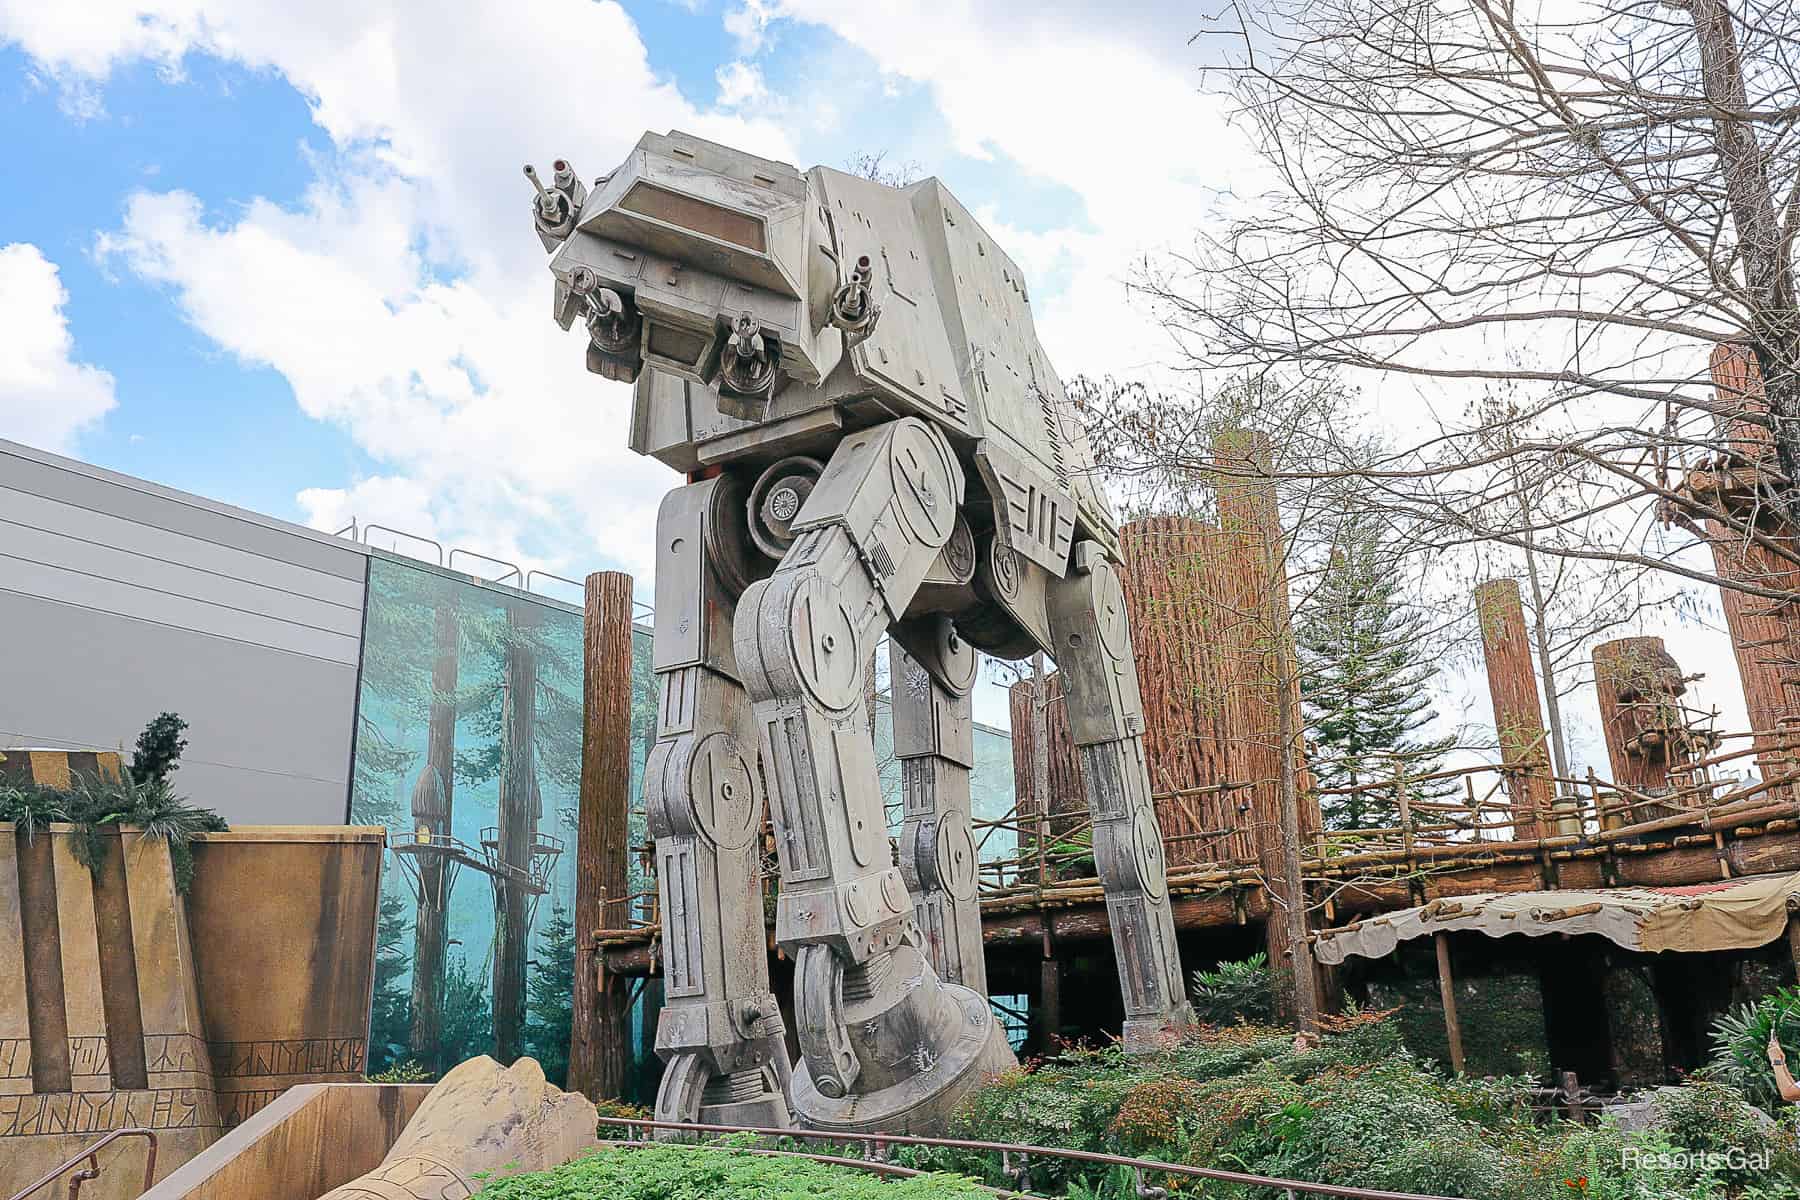 an AT-AT Walker in the queue for Star Tours 